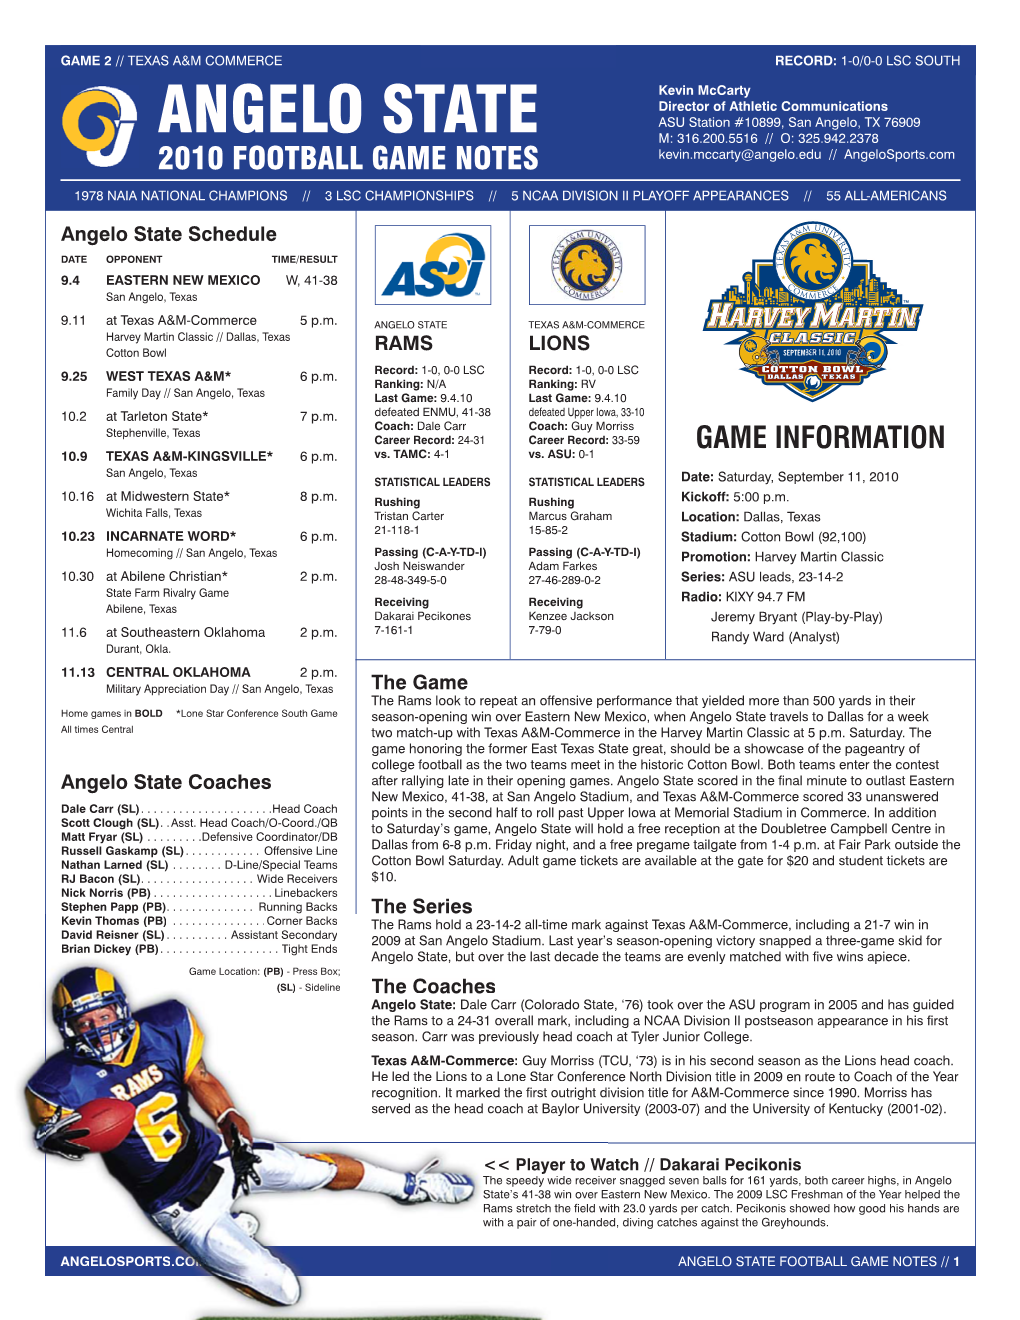 ANGELO STATE DEPTH CHART Vs. TEXAS A&M-COMMERCE